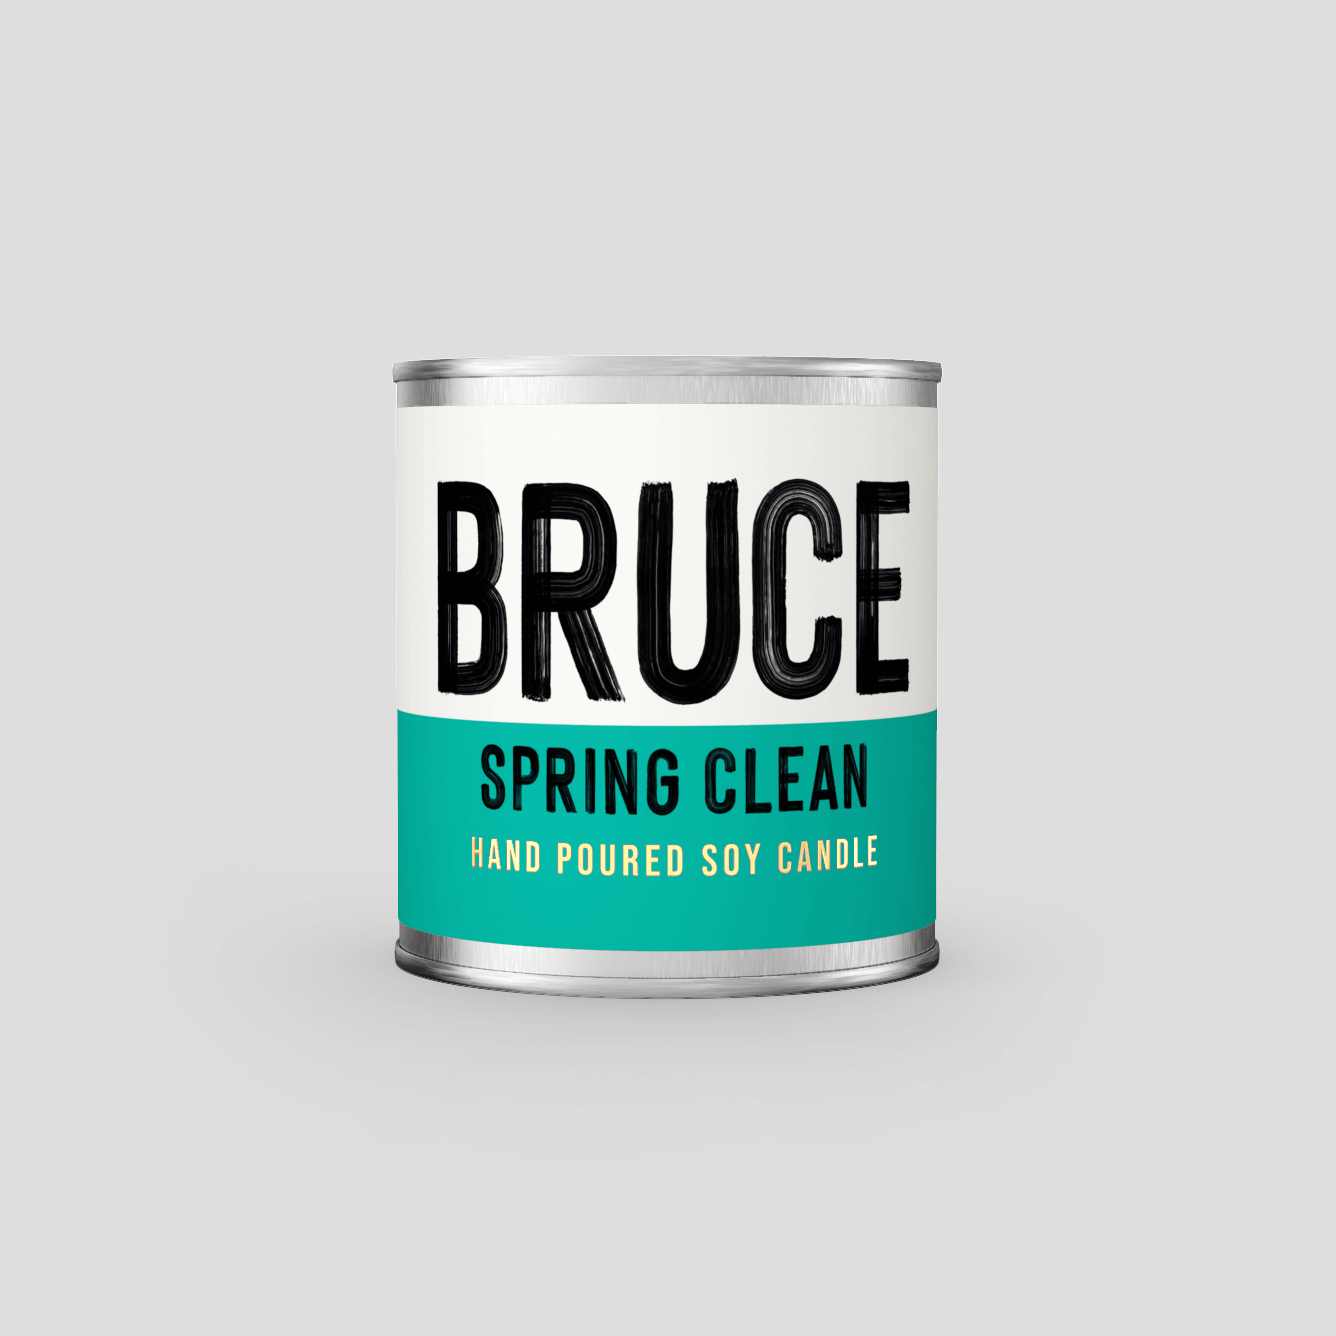 A hand poured soy wax candle in a paint can style aluminium can. The label says 'Bruce Spring Clean'